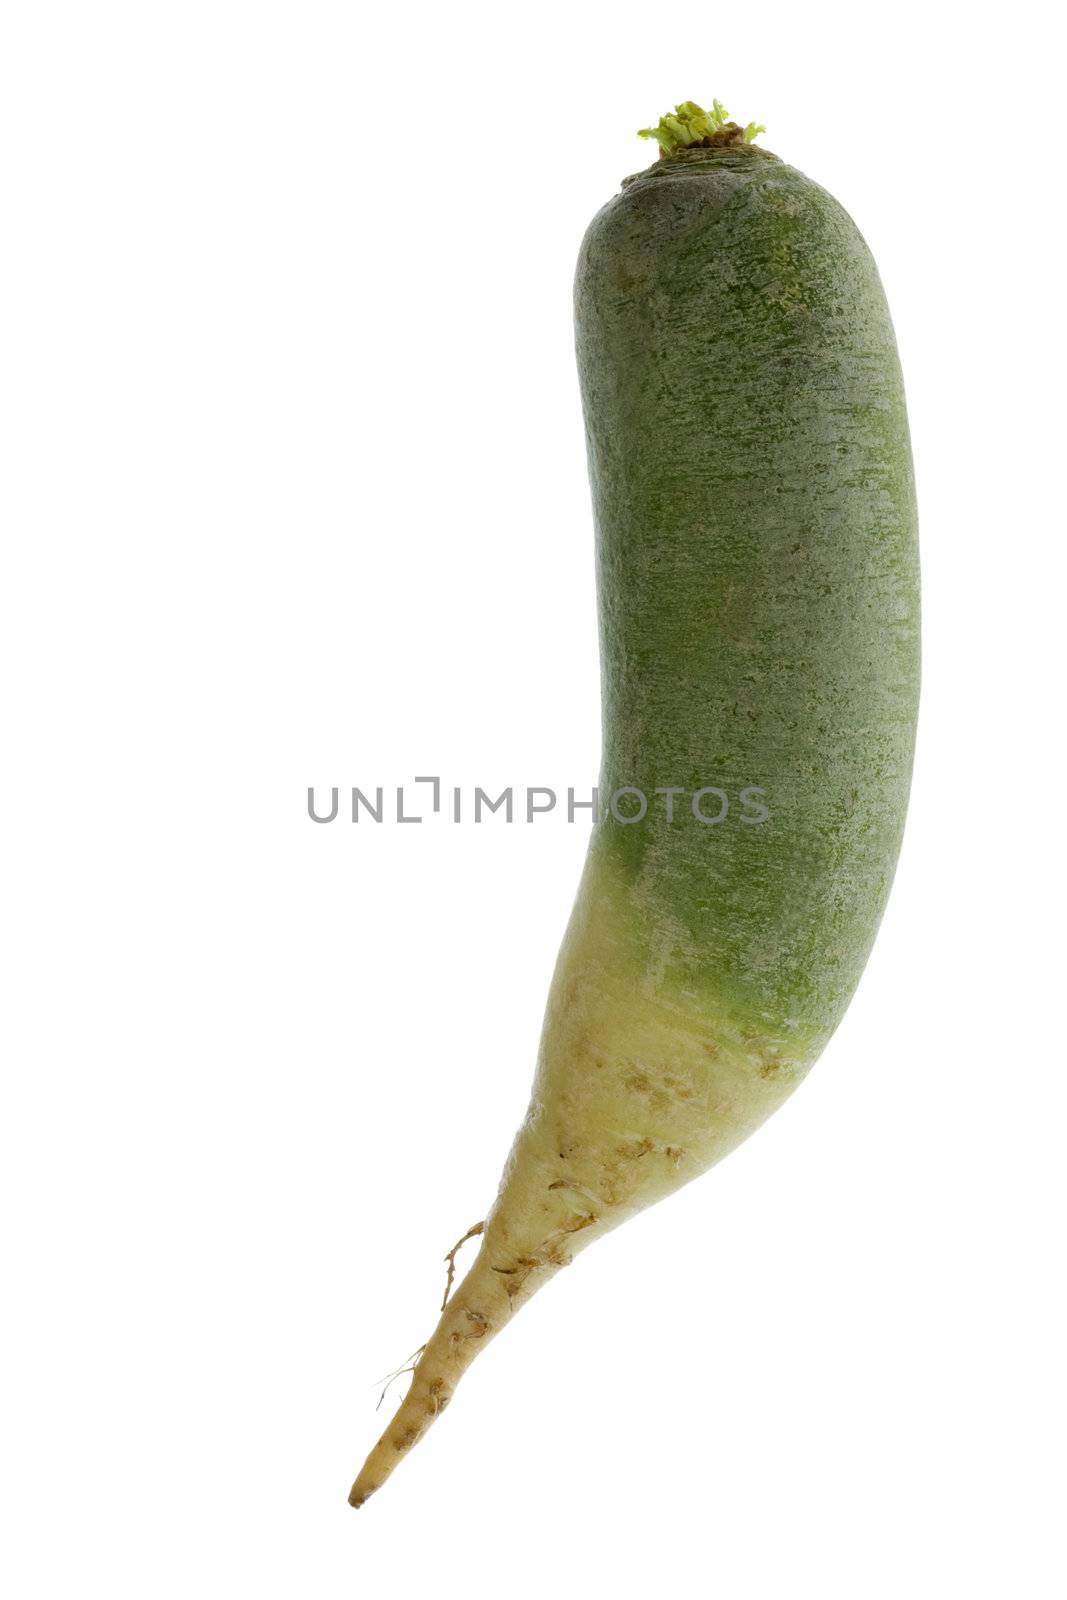 Isolated image of a green Chinese radish.